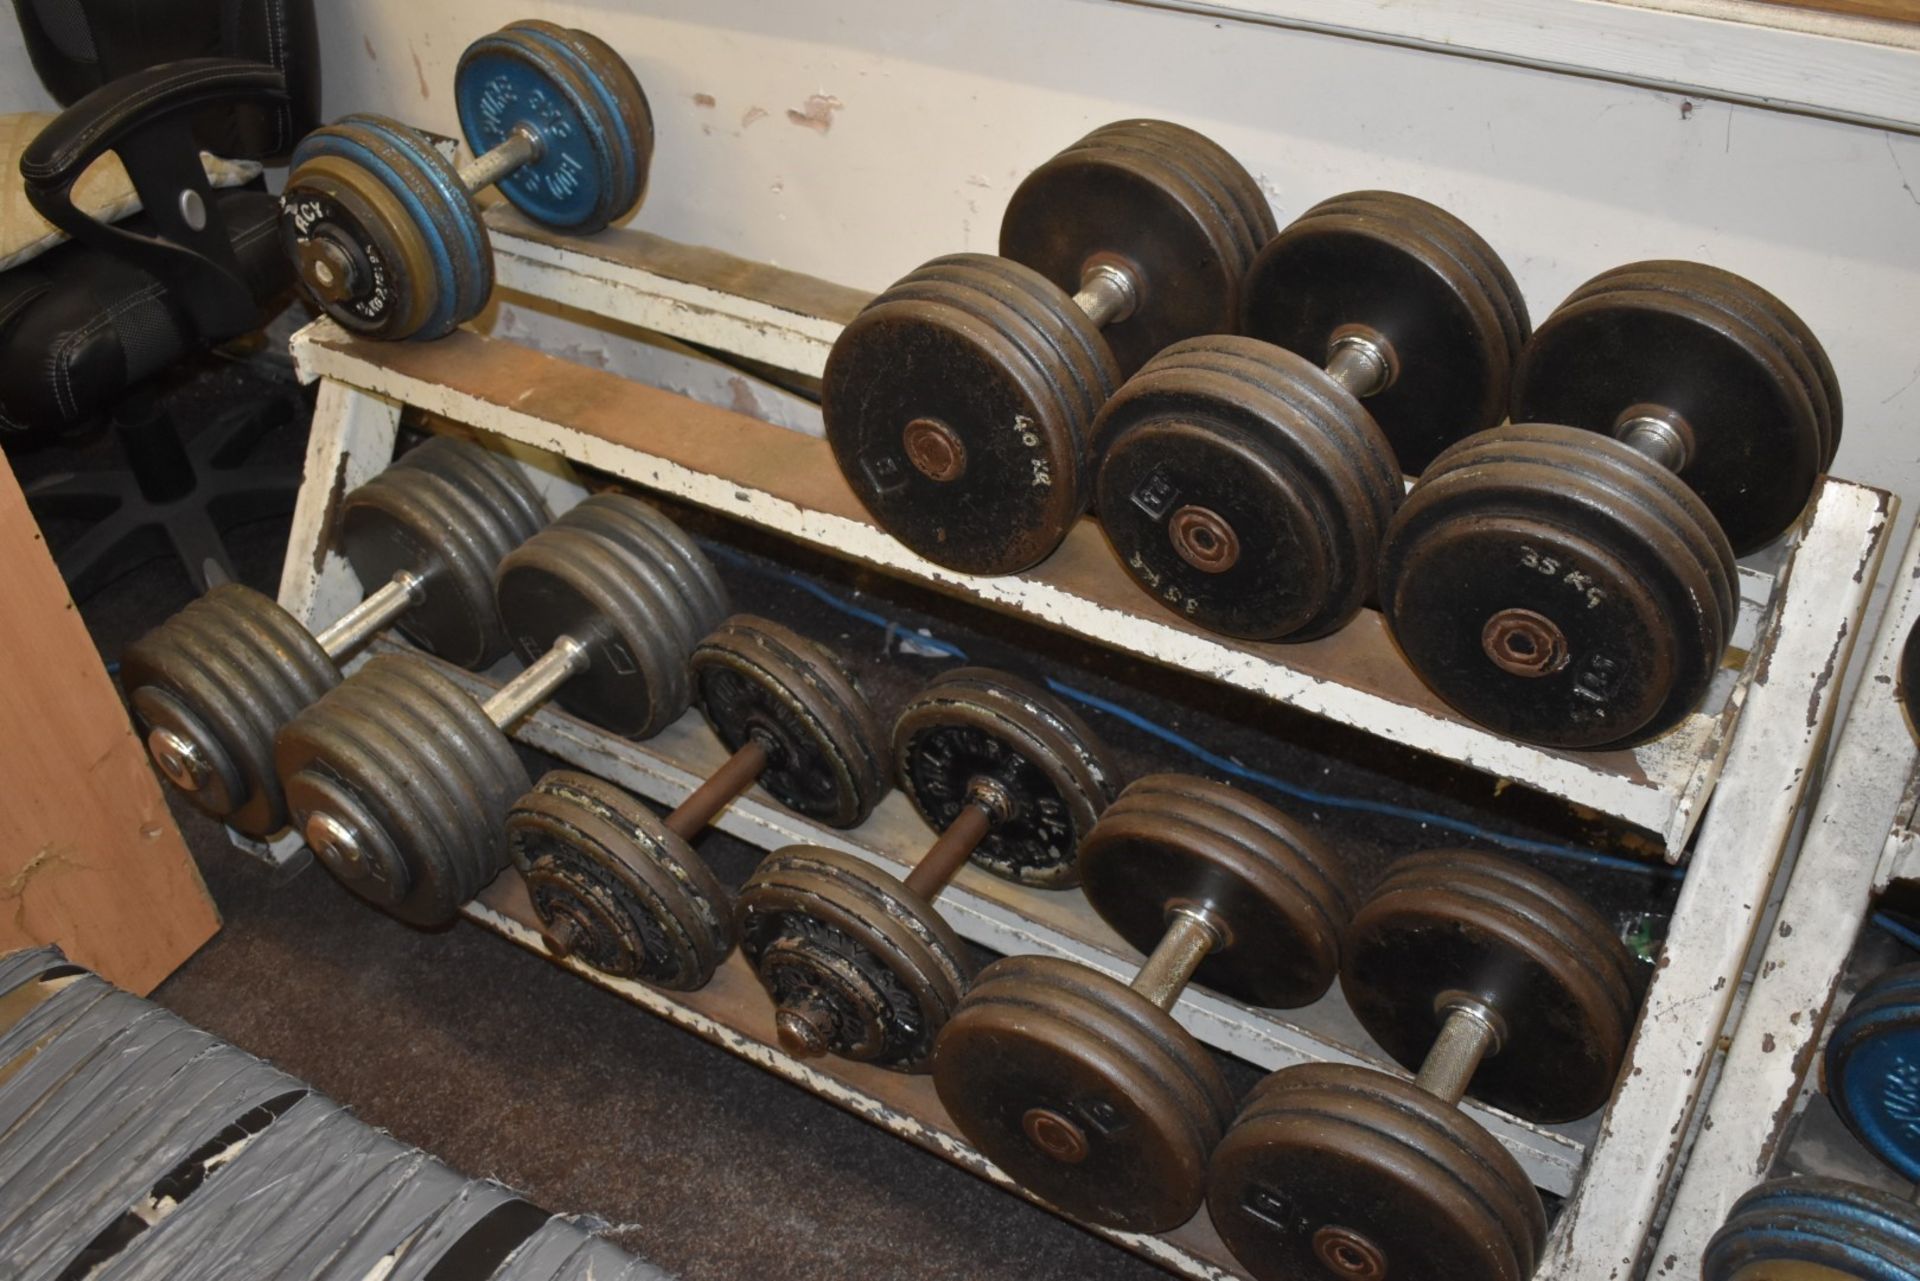 Approx 700 x Weight Lifting Weight Discs, 70 x Weight Lifting Bars, 32 x Weight Dumbells, 15 x - Image 6 of 40